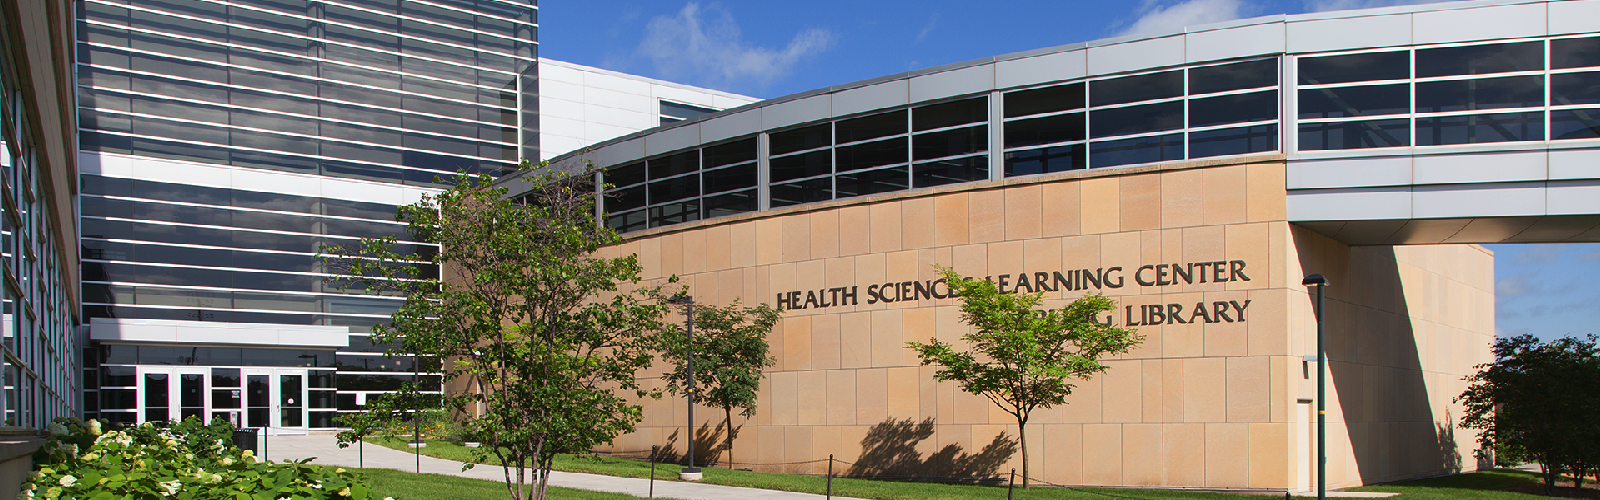 HSLC, Health Sciences Learning Center, UW-Madison, SMPH, School of Medicine and Public Health